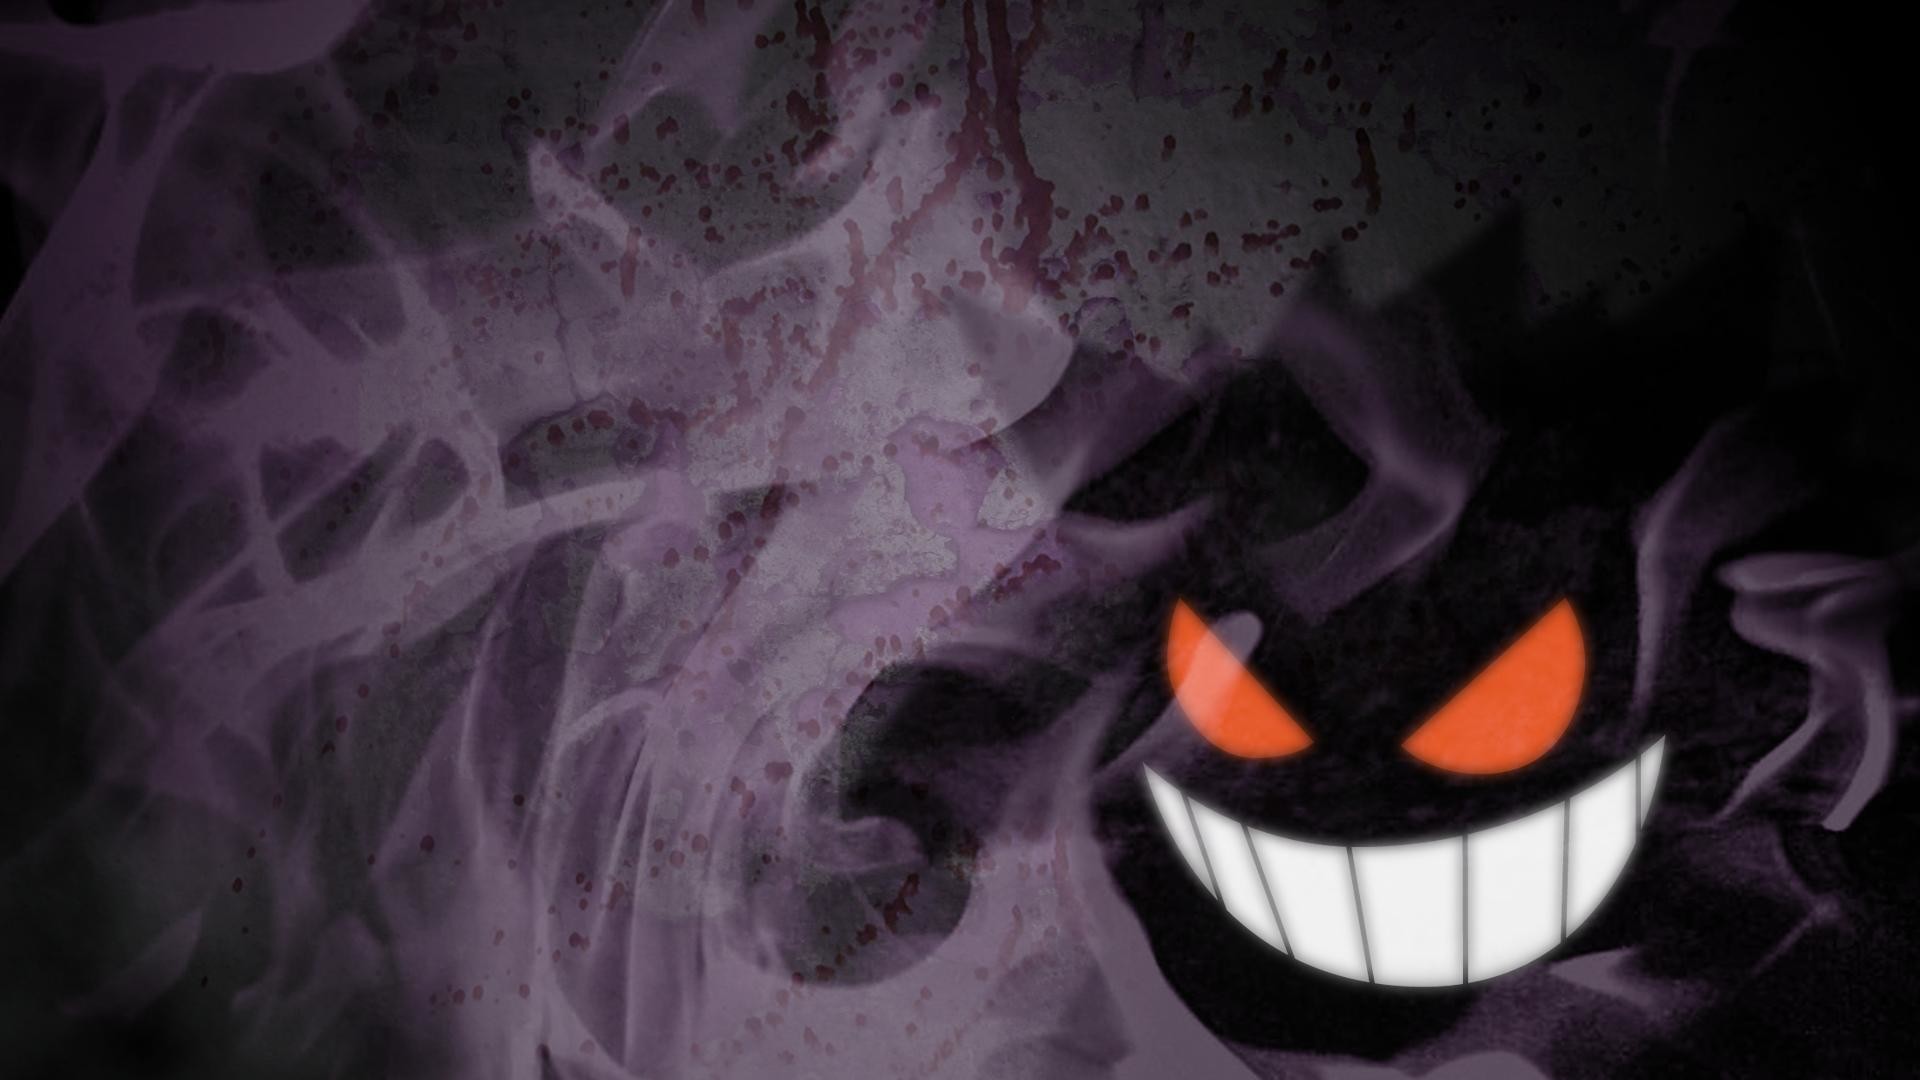 1920x1080 Got bored and threw together a Gengar wallpaper.